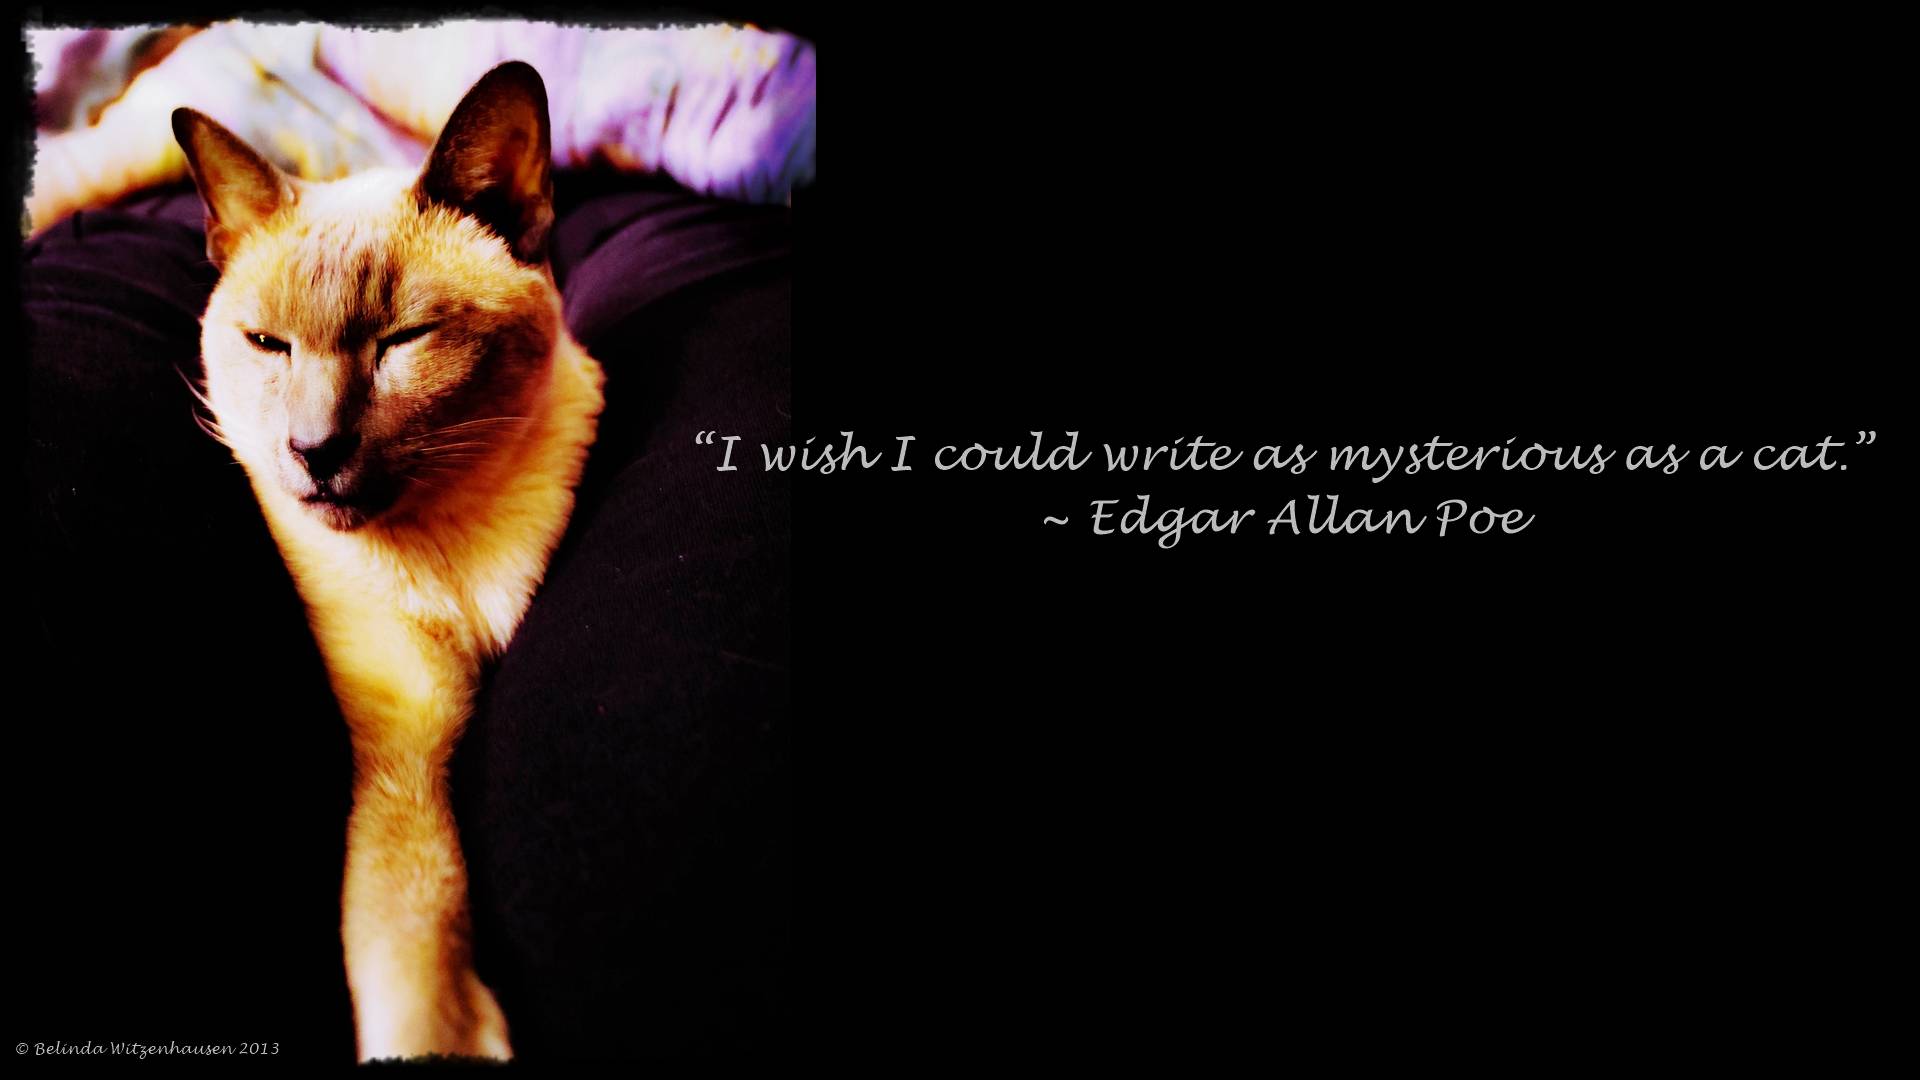 Edgar Allan Poe Quotes A Picture With An Quote